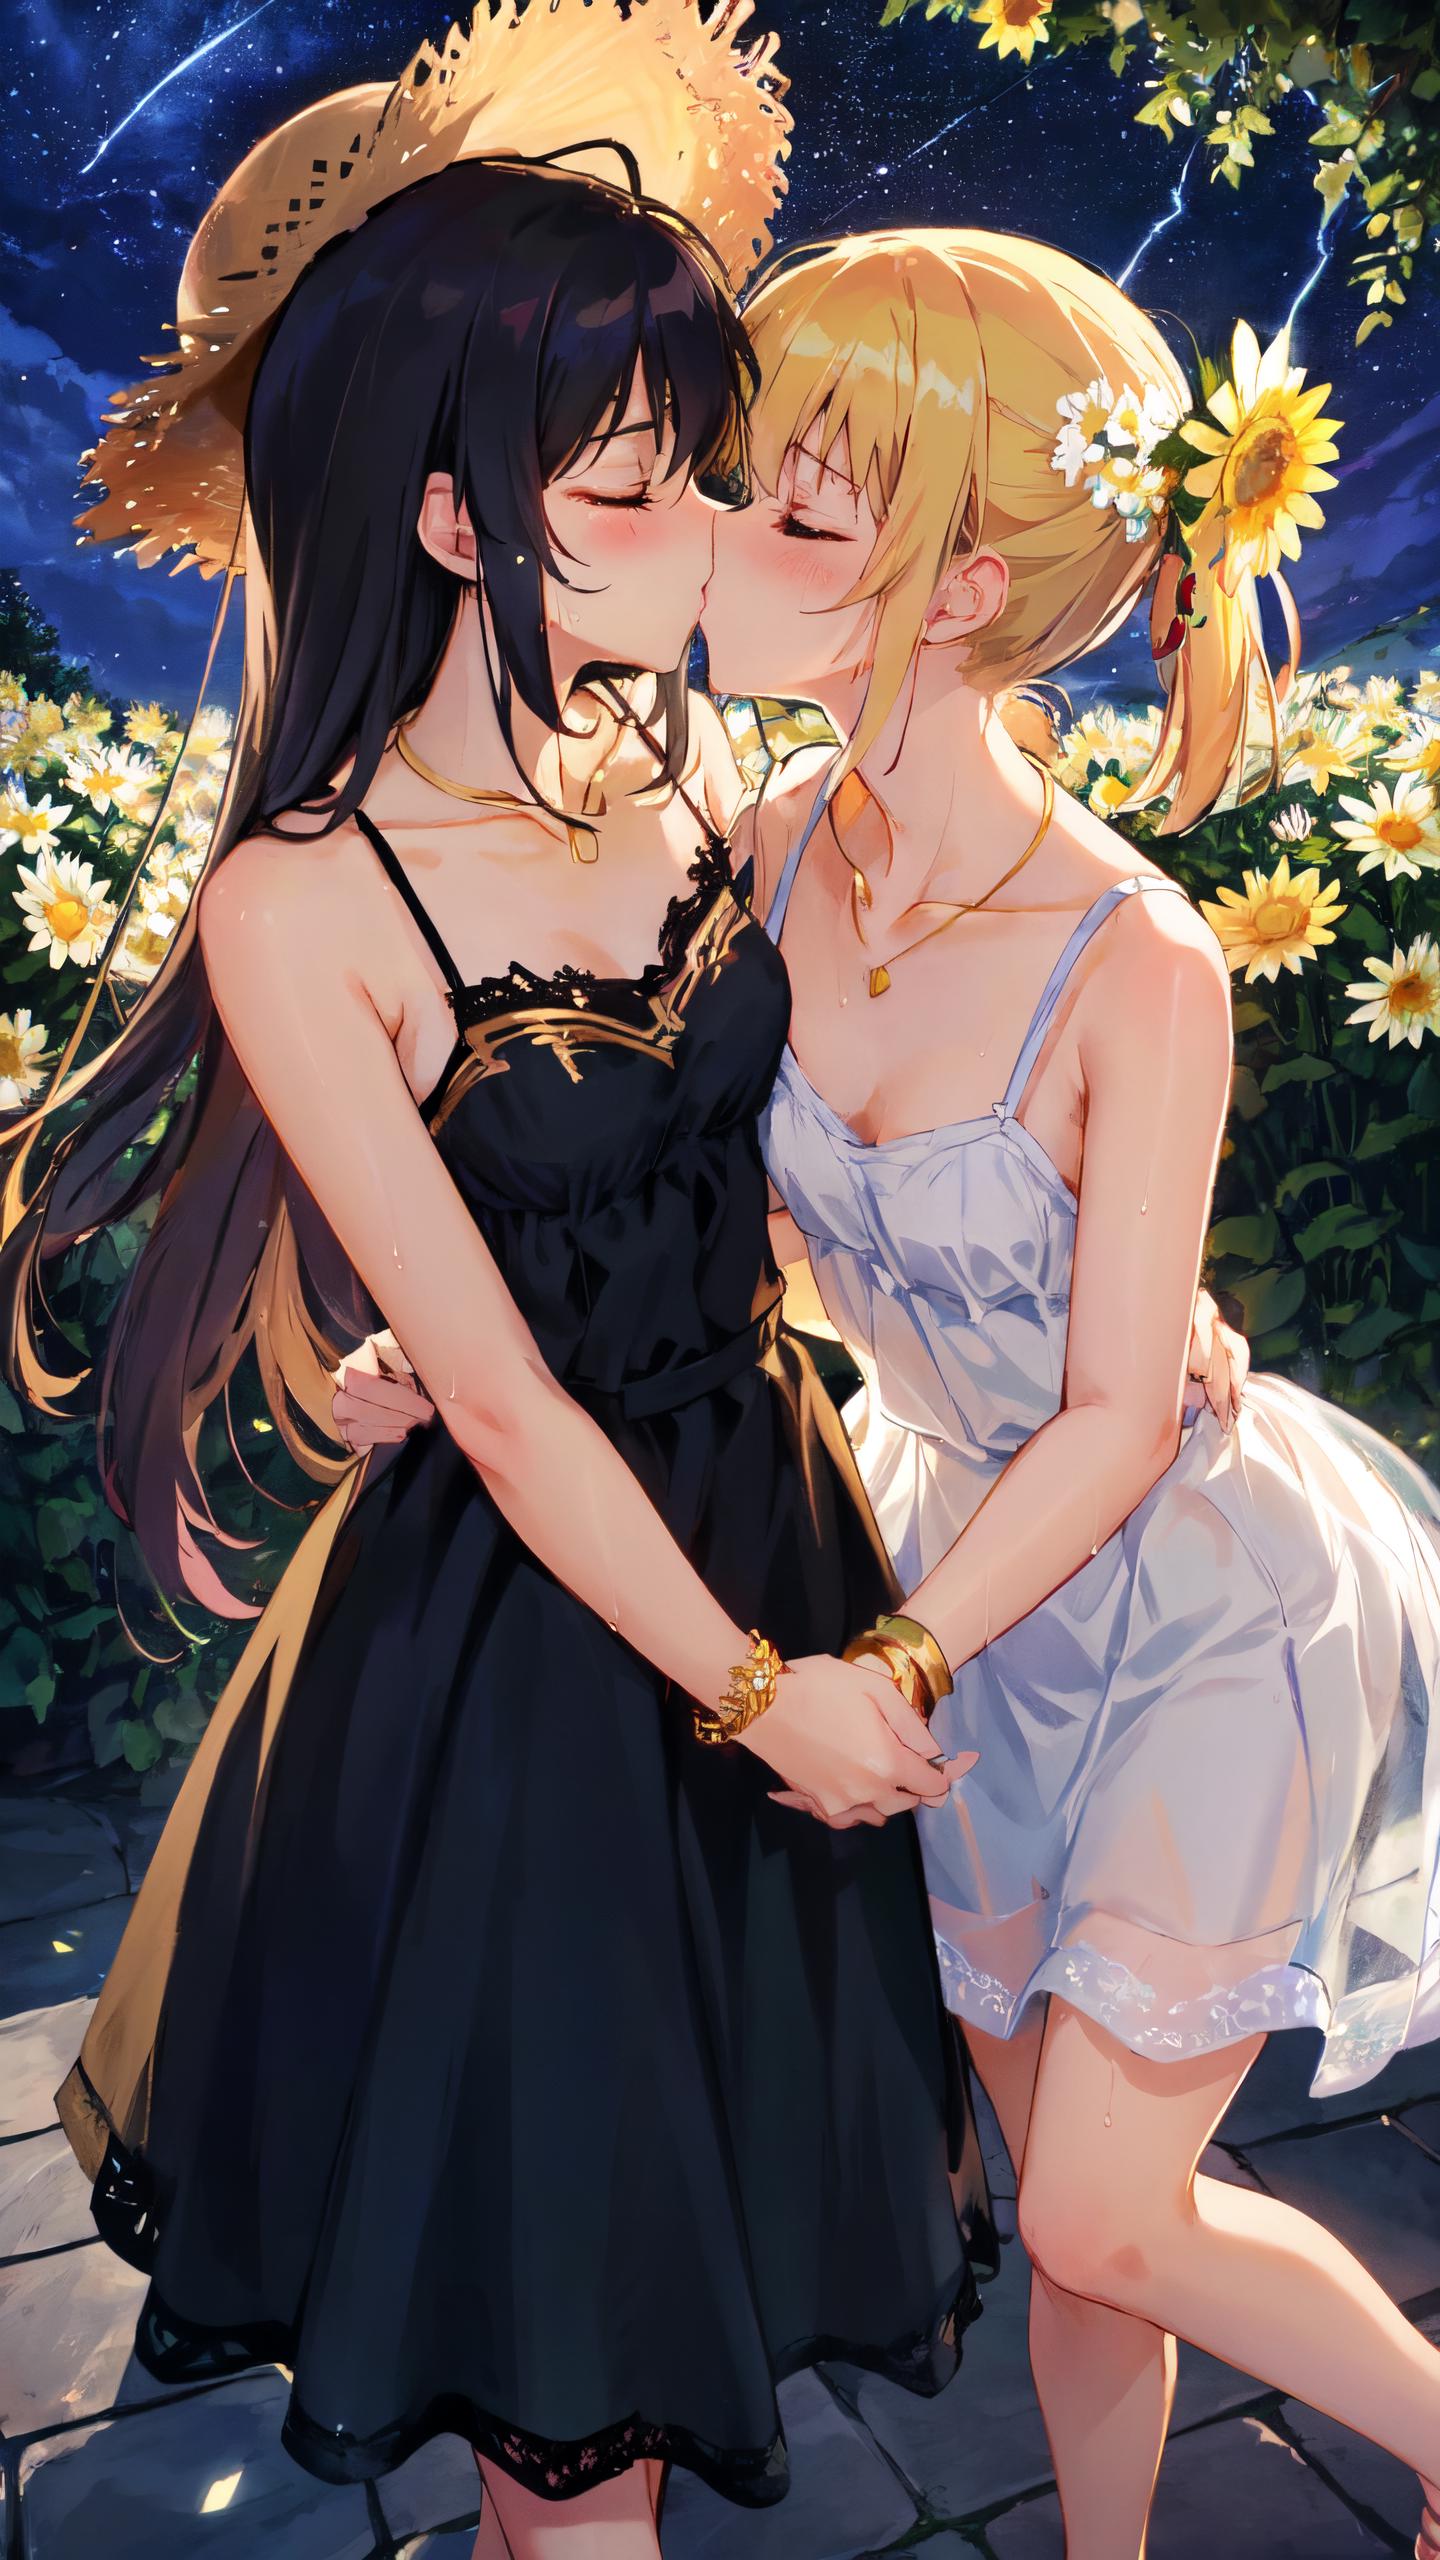 Two girls with long hair wearing dresses in a field of flowers.